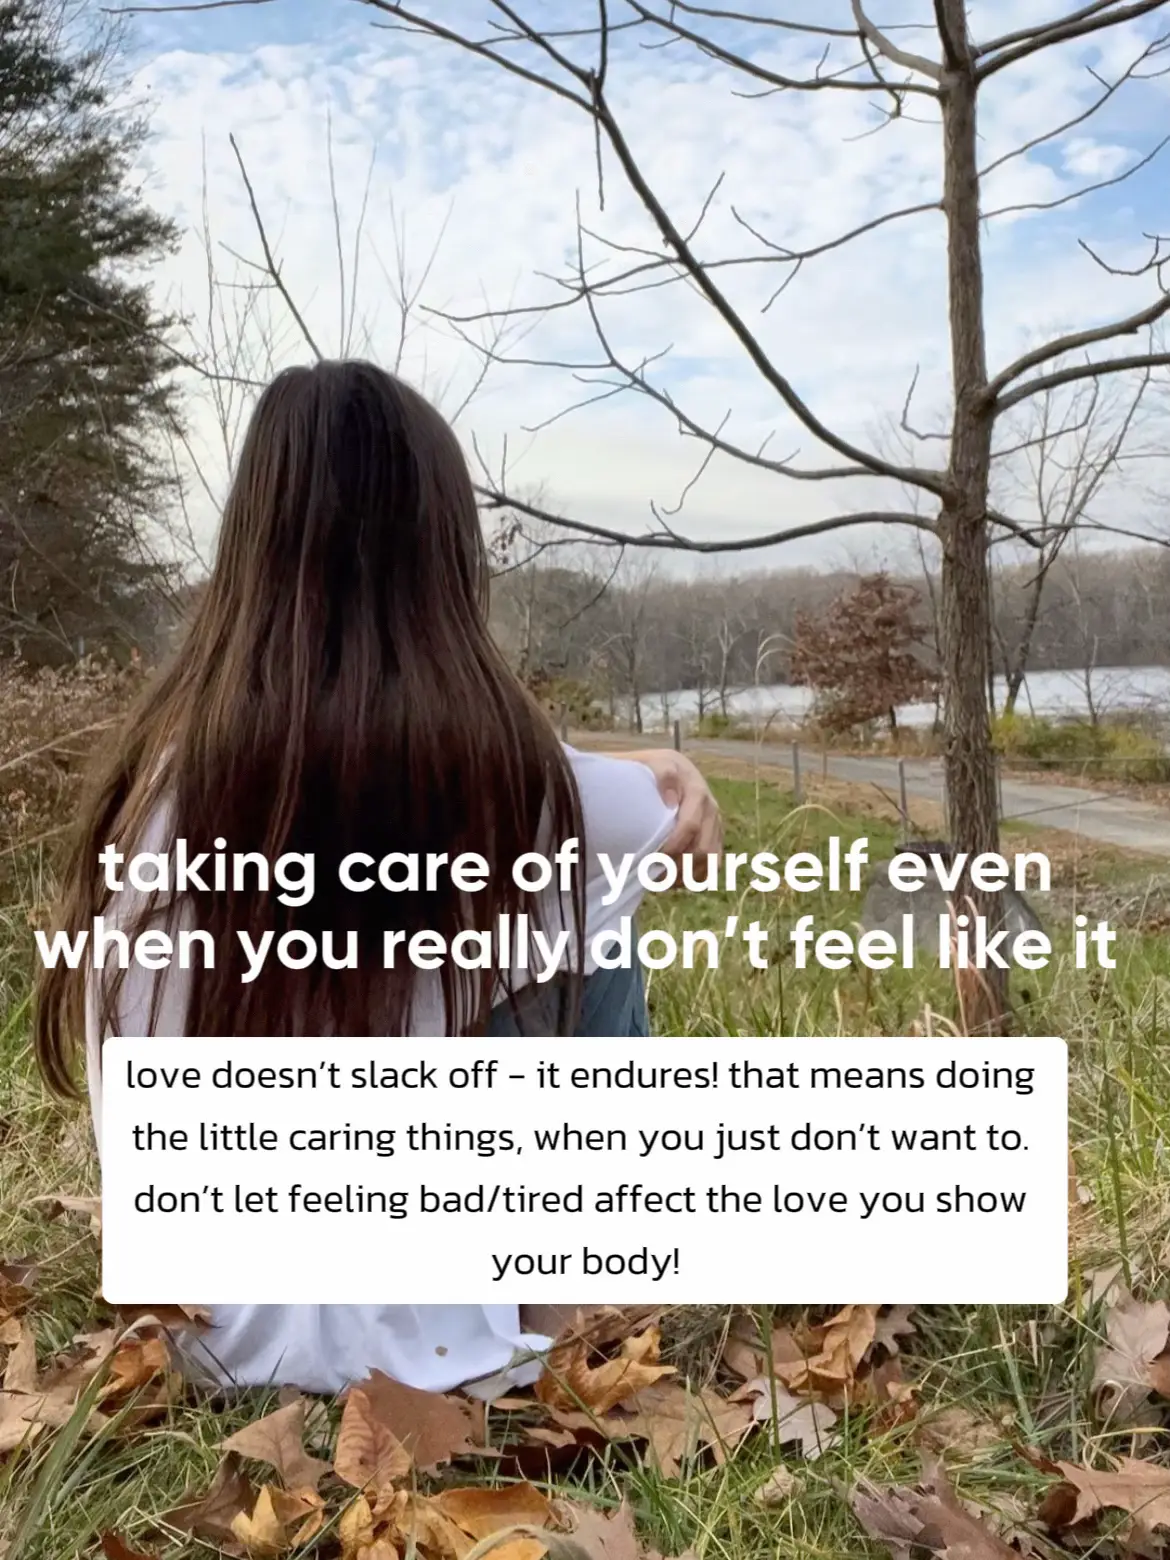  A woman sitting in front of a tree with a sign that says "taking care of yourself even when you really don't feel like it. love doesn't slack off - it endures! that means doing the little caring things, when you just don't want to don't let feeling bad